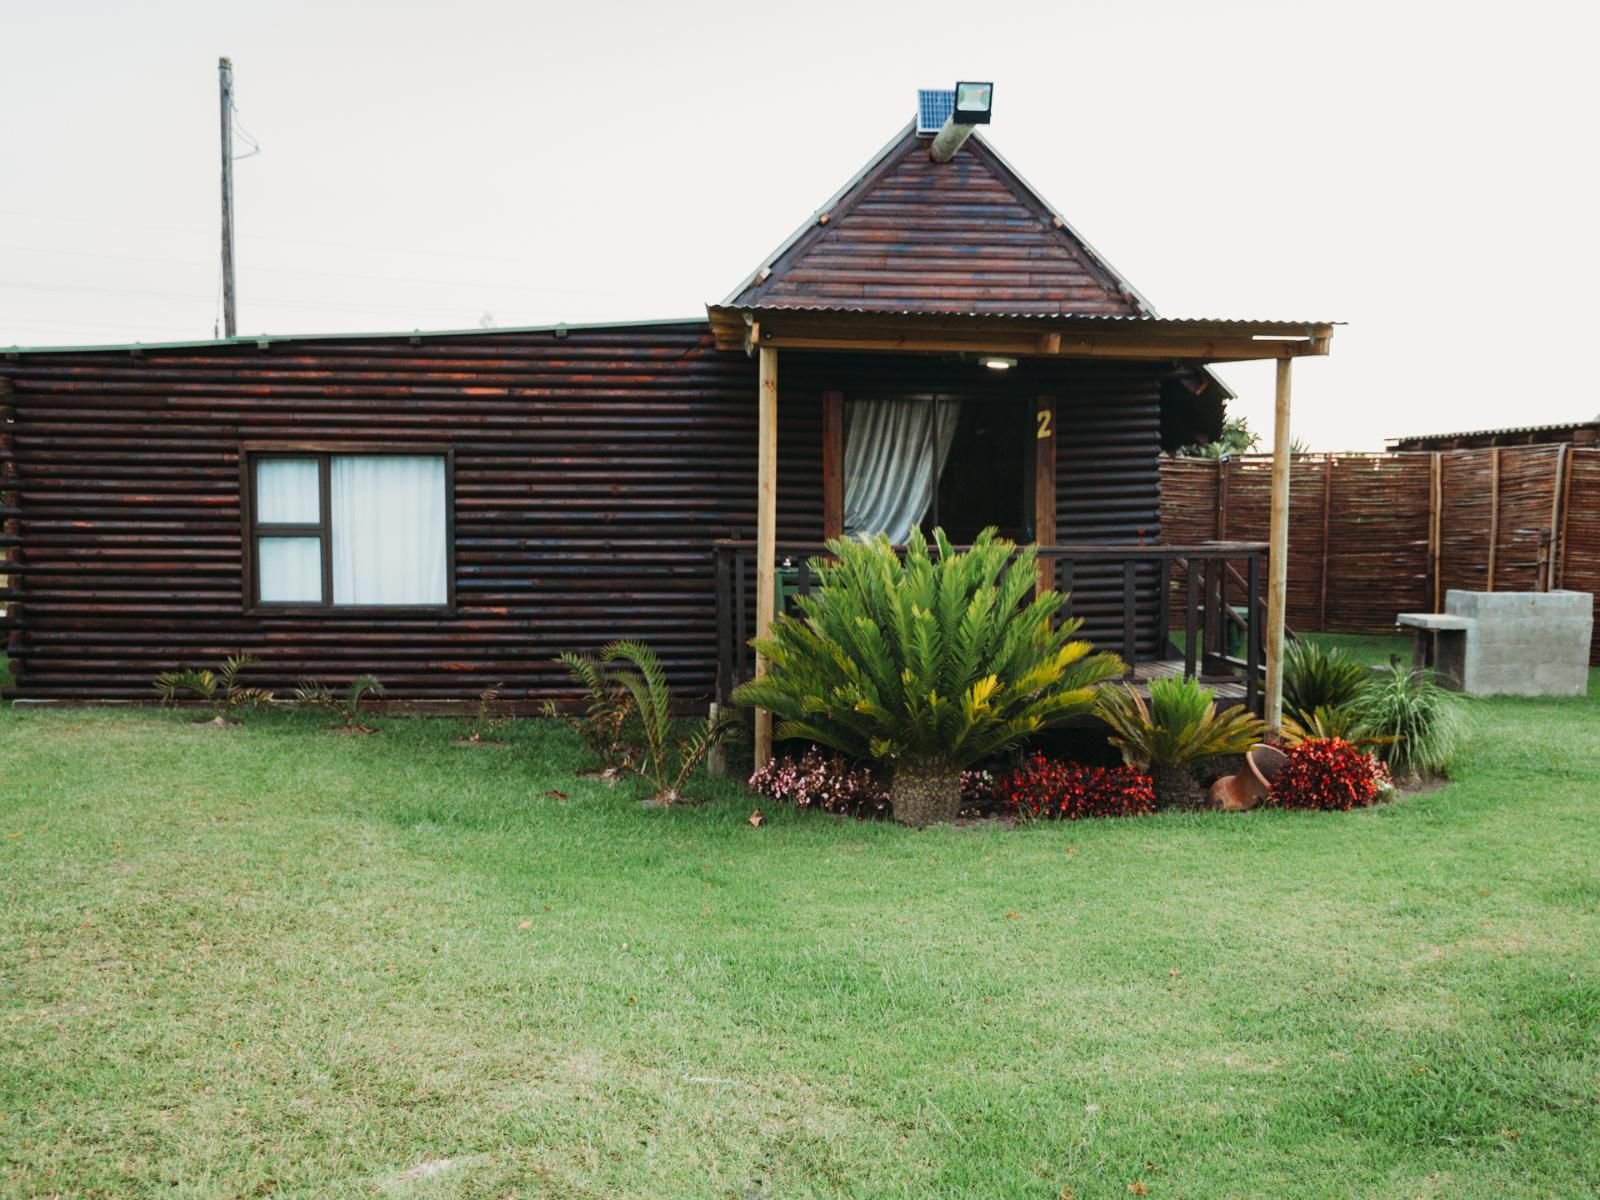 Amperda Log Cabins Tsitsikamma Eastern Cape South Africa Building, Architecture, House